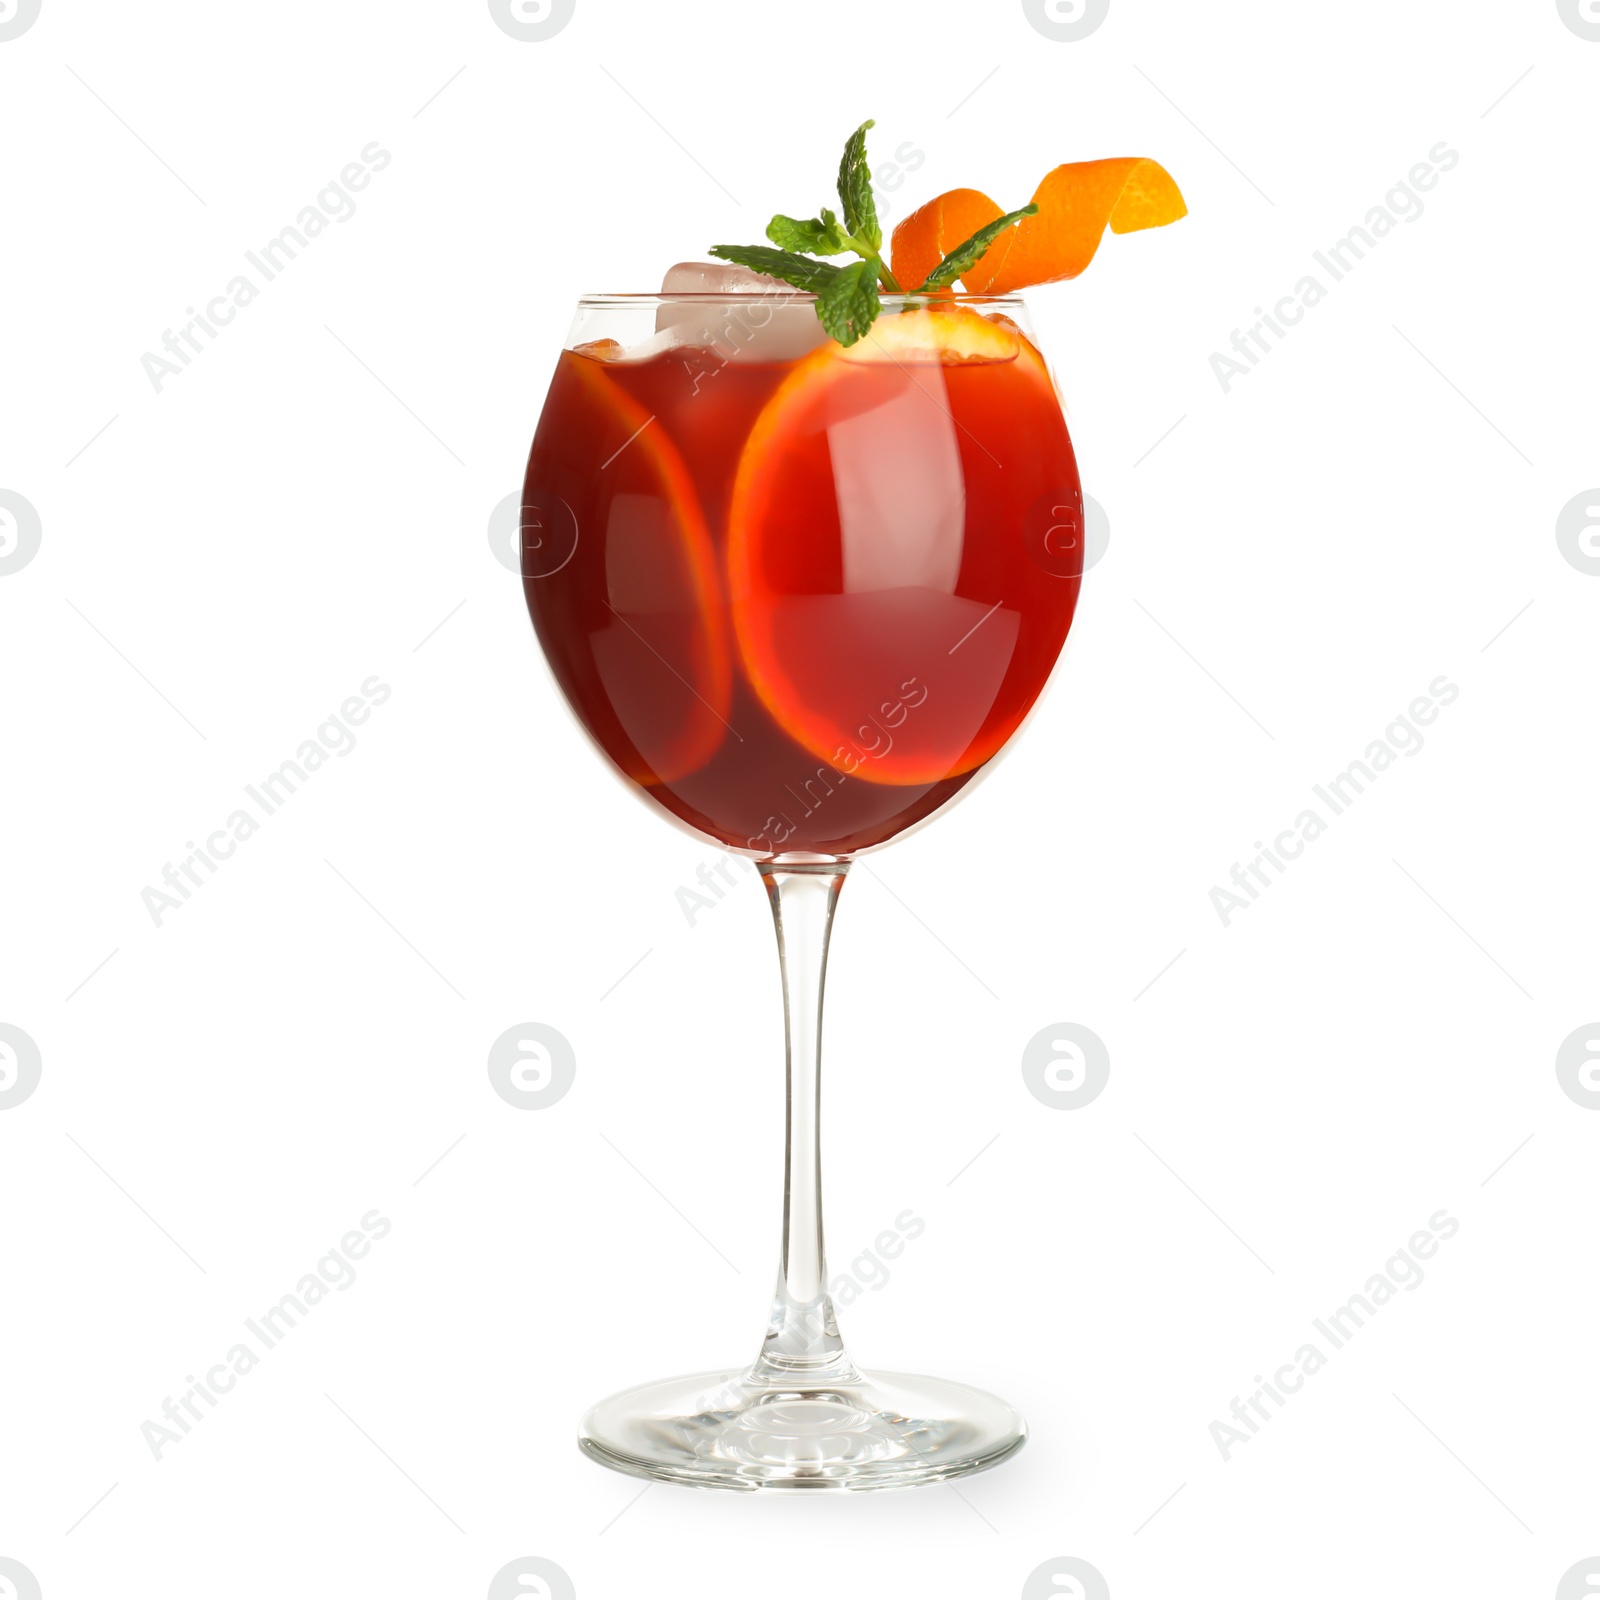 Photo of Glass of Aperol Spritz cocktail on white background. Traditional alcoholic drink